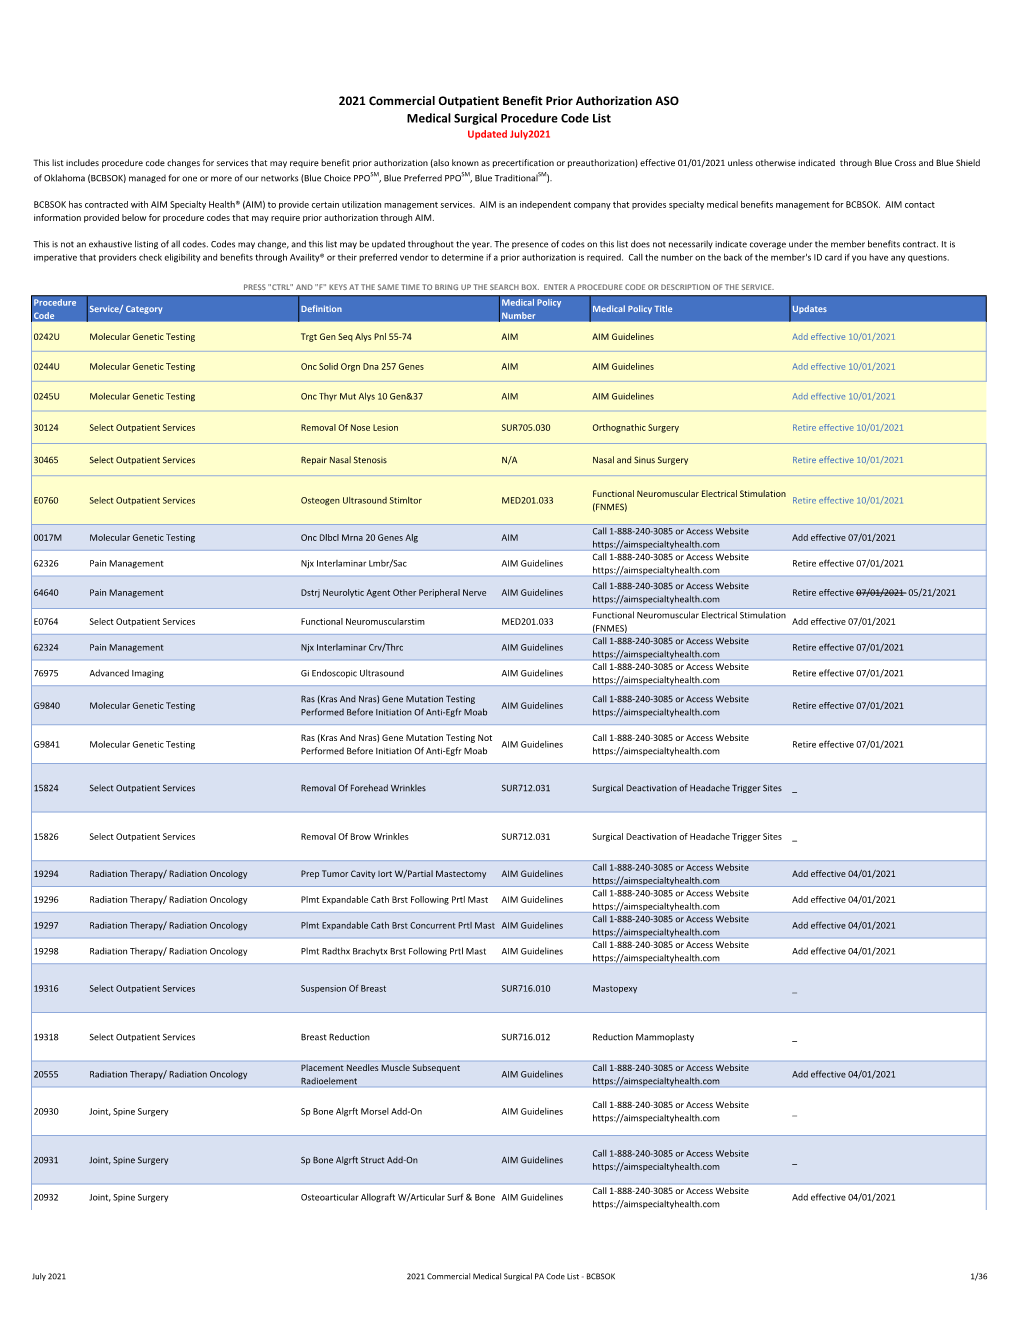 2021 Commercial Outpatient Benefit Prior Authorization ASO Medical Surgical Procedure Code List Updated July2021